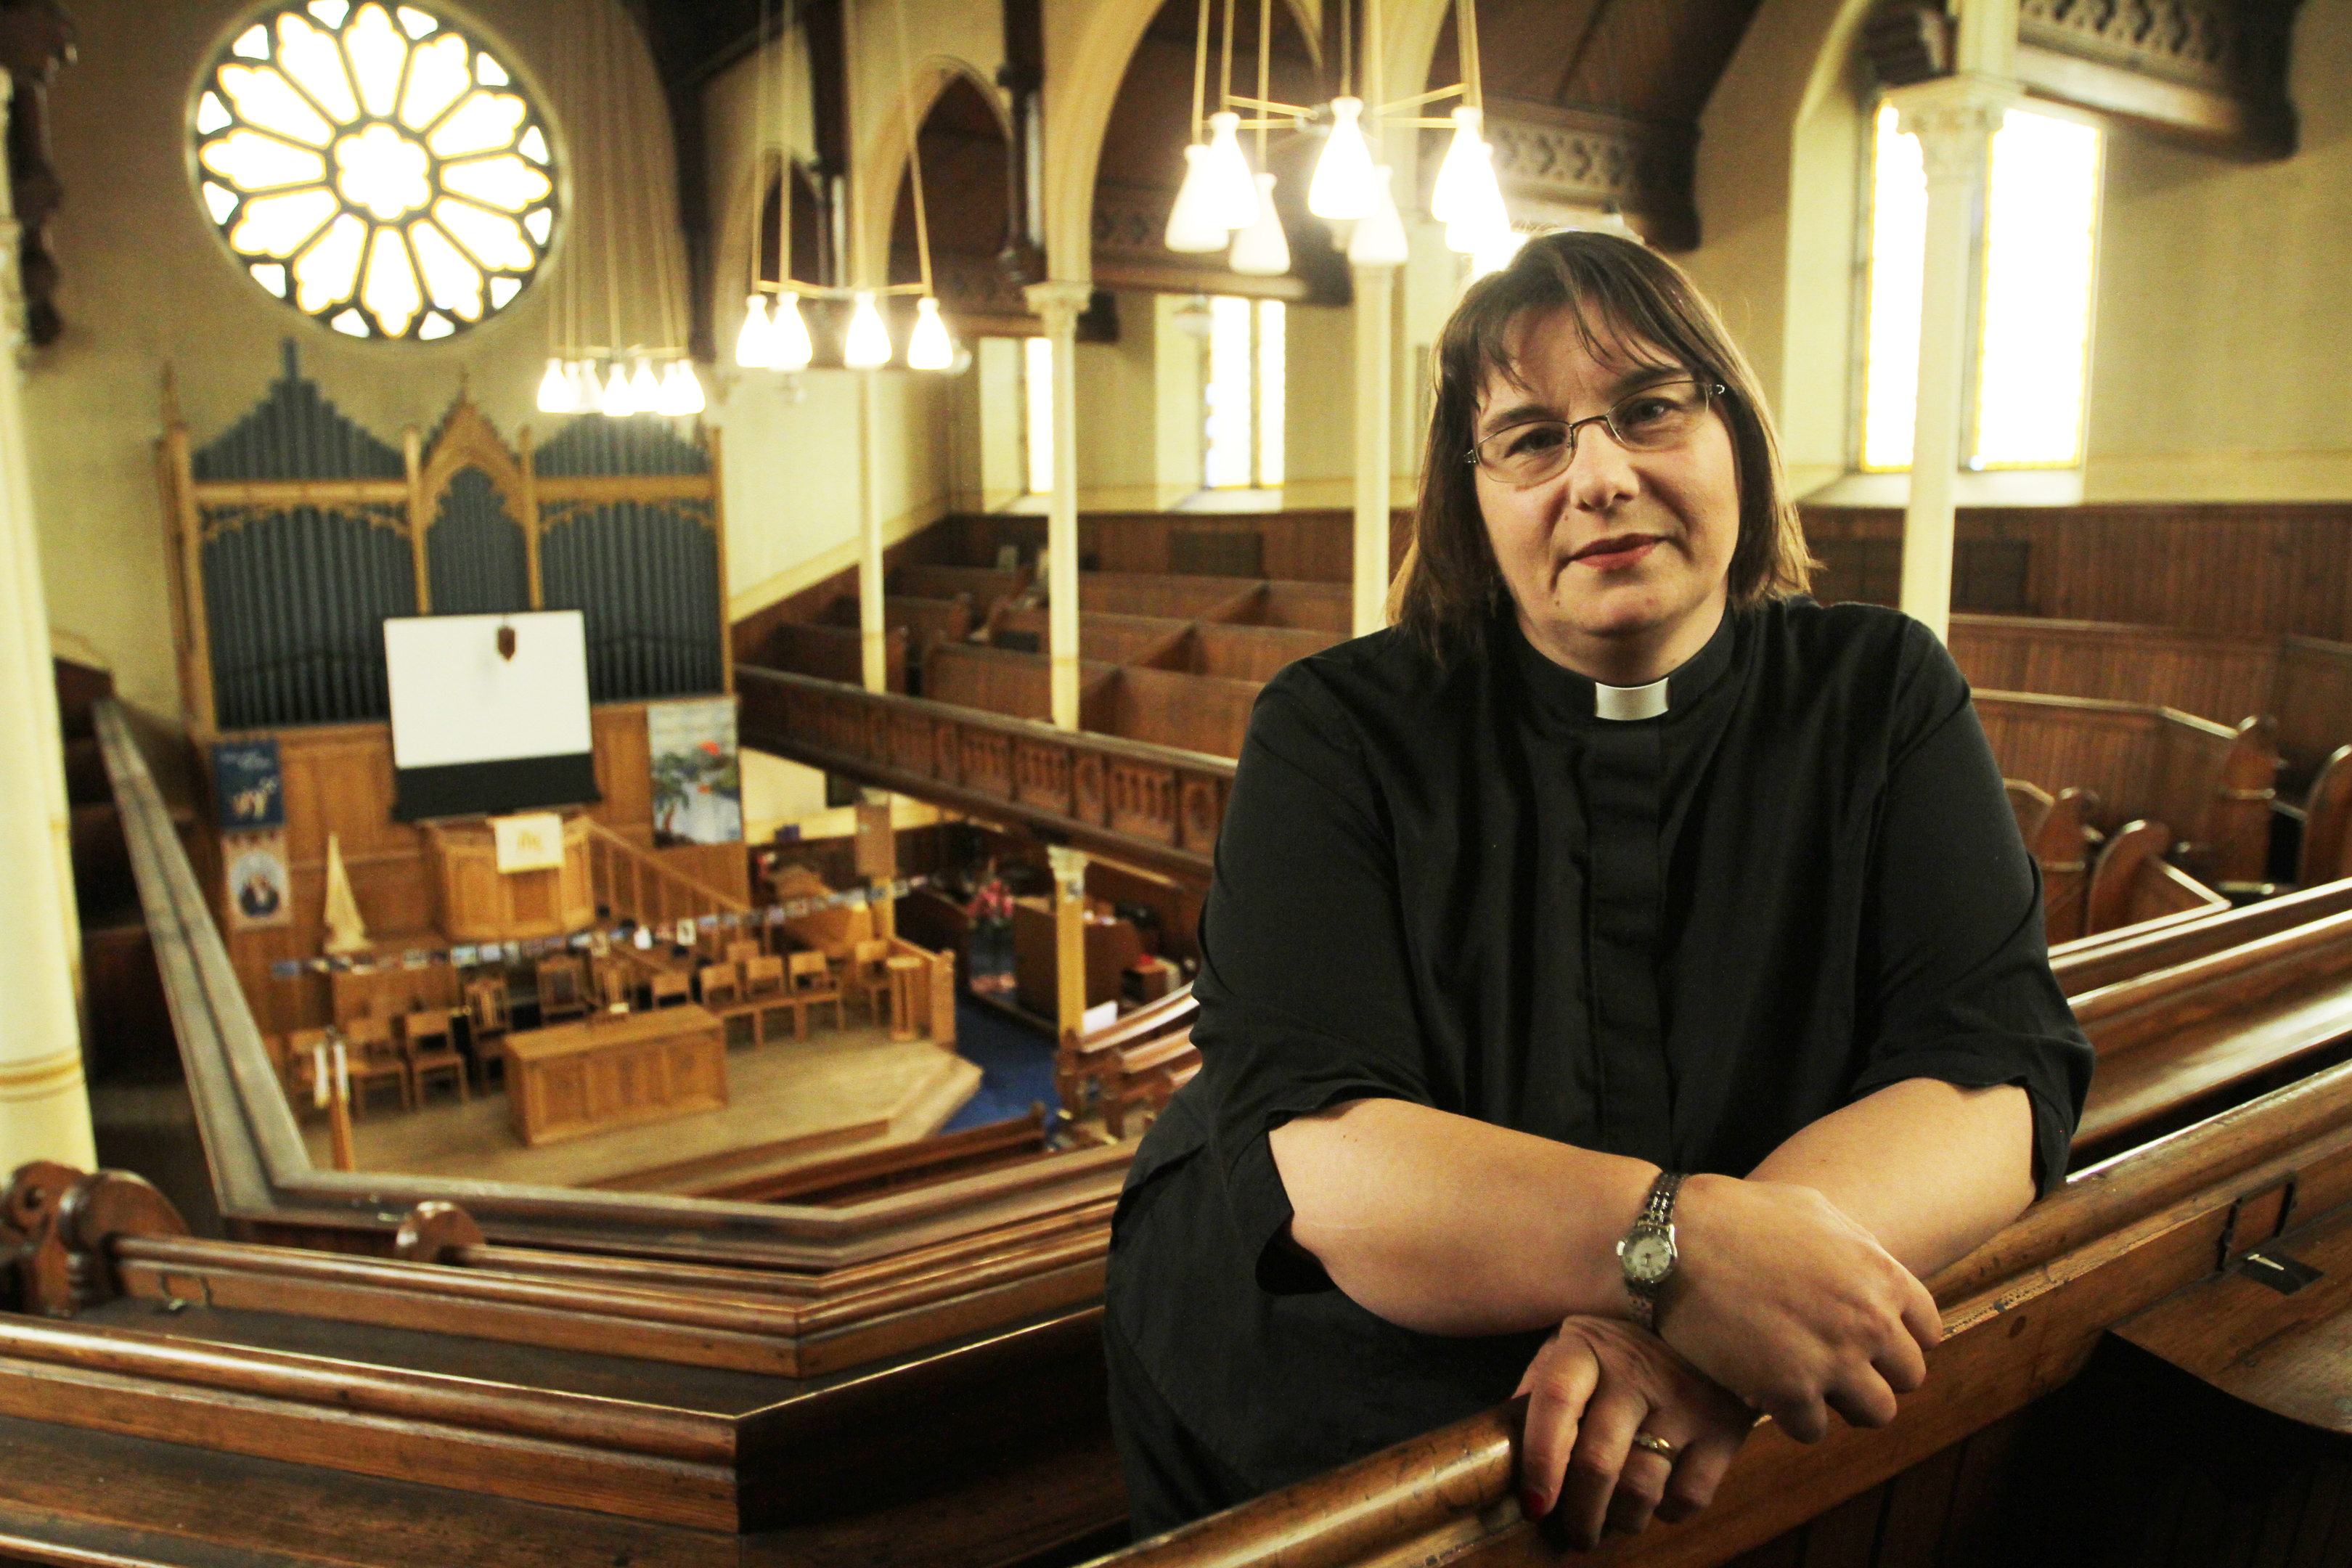 Rev Maggie Hunt wants to replace the crumbling building with a new community facility for all